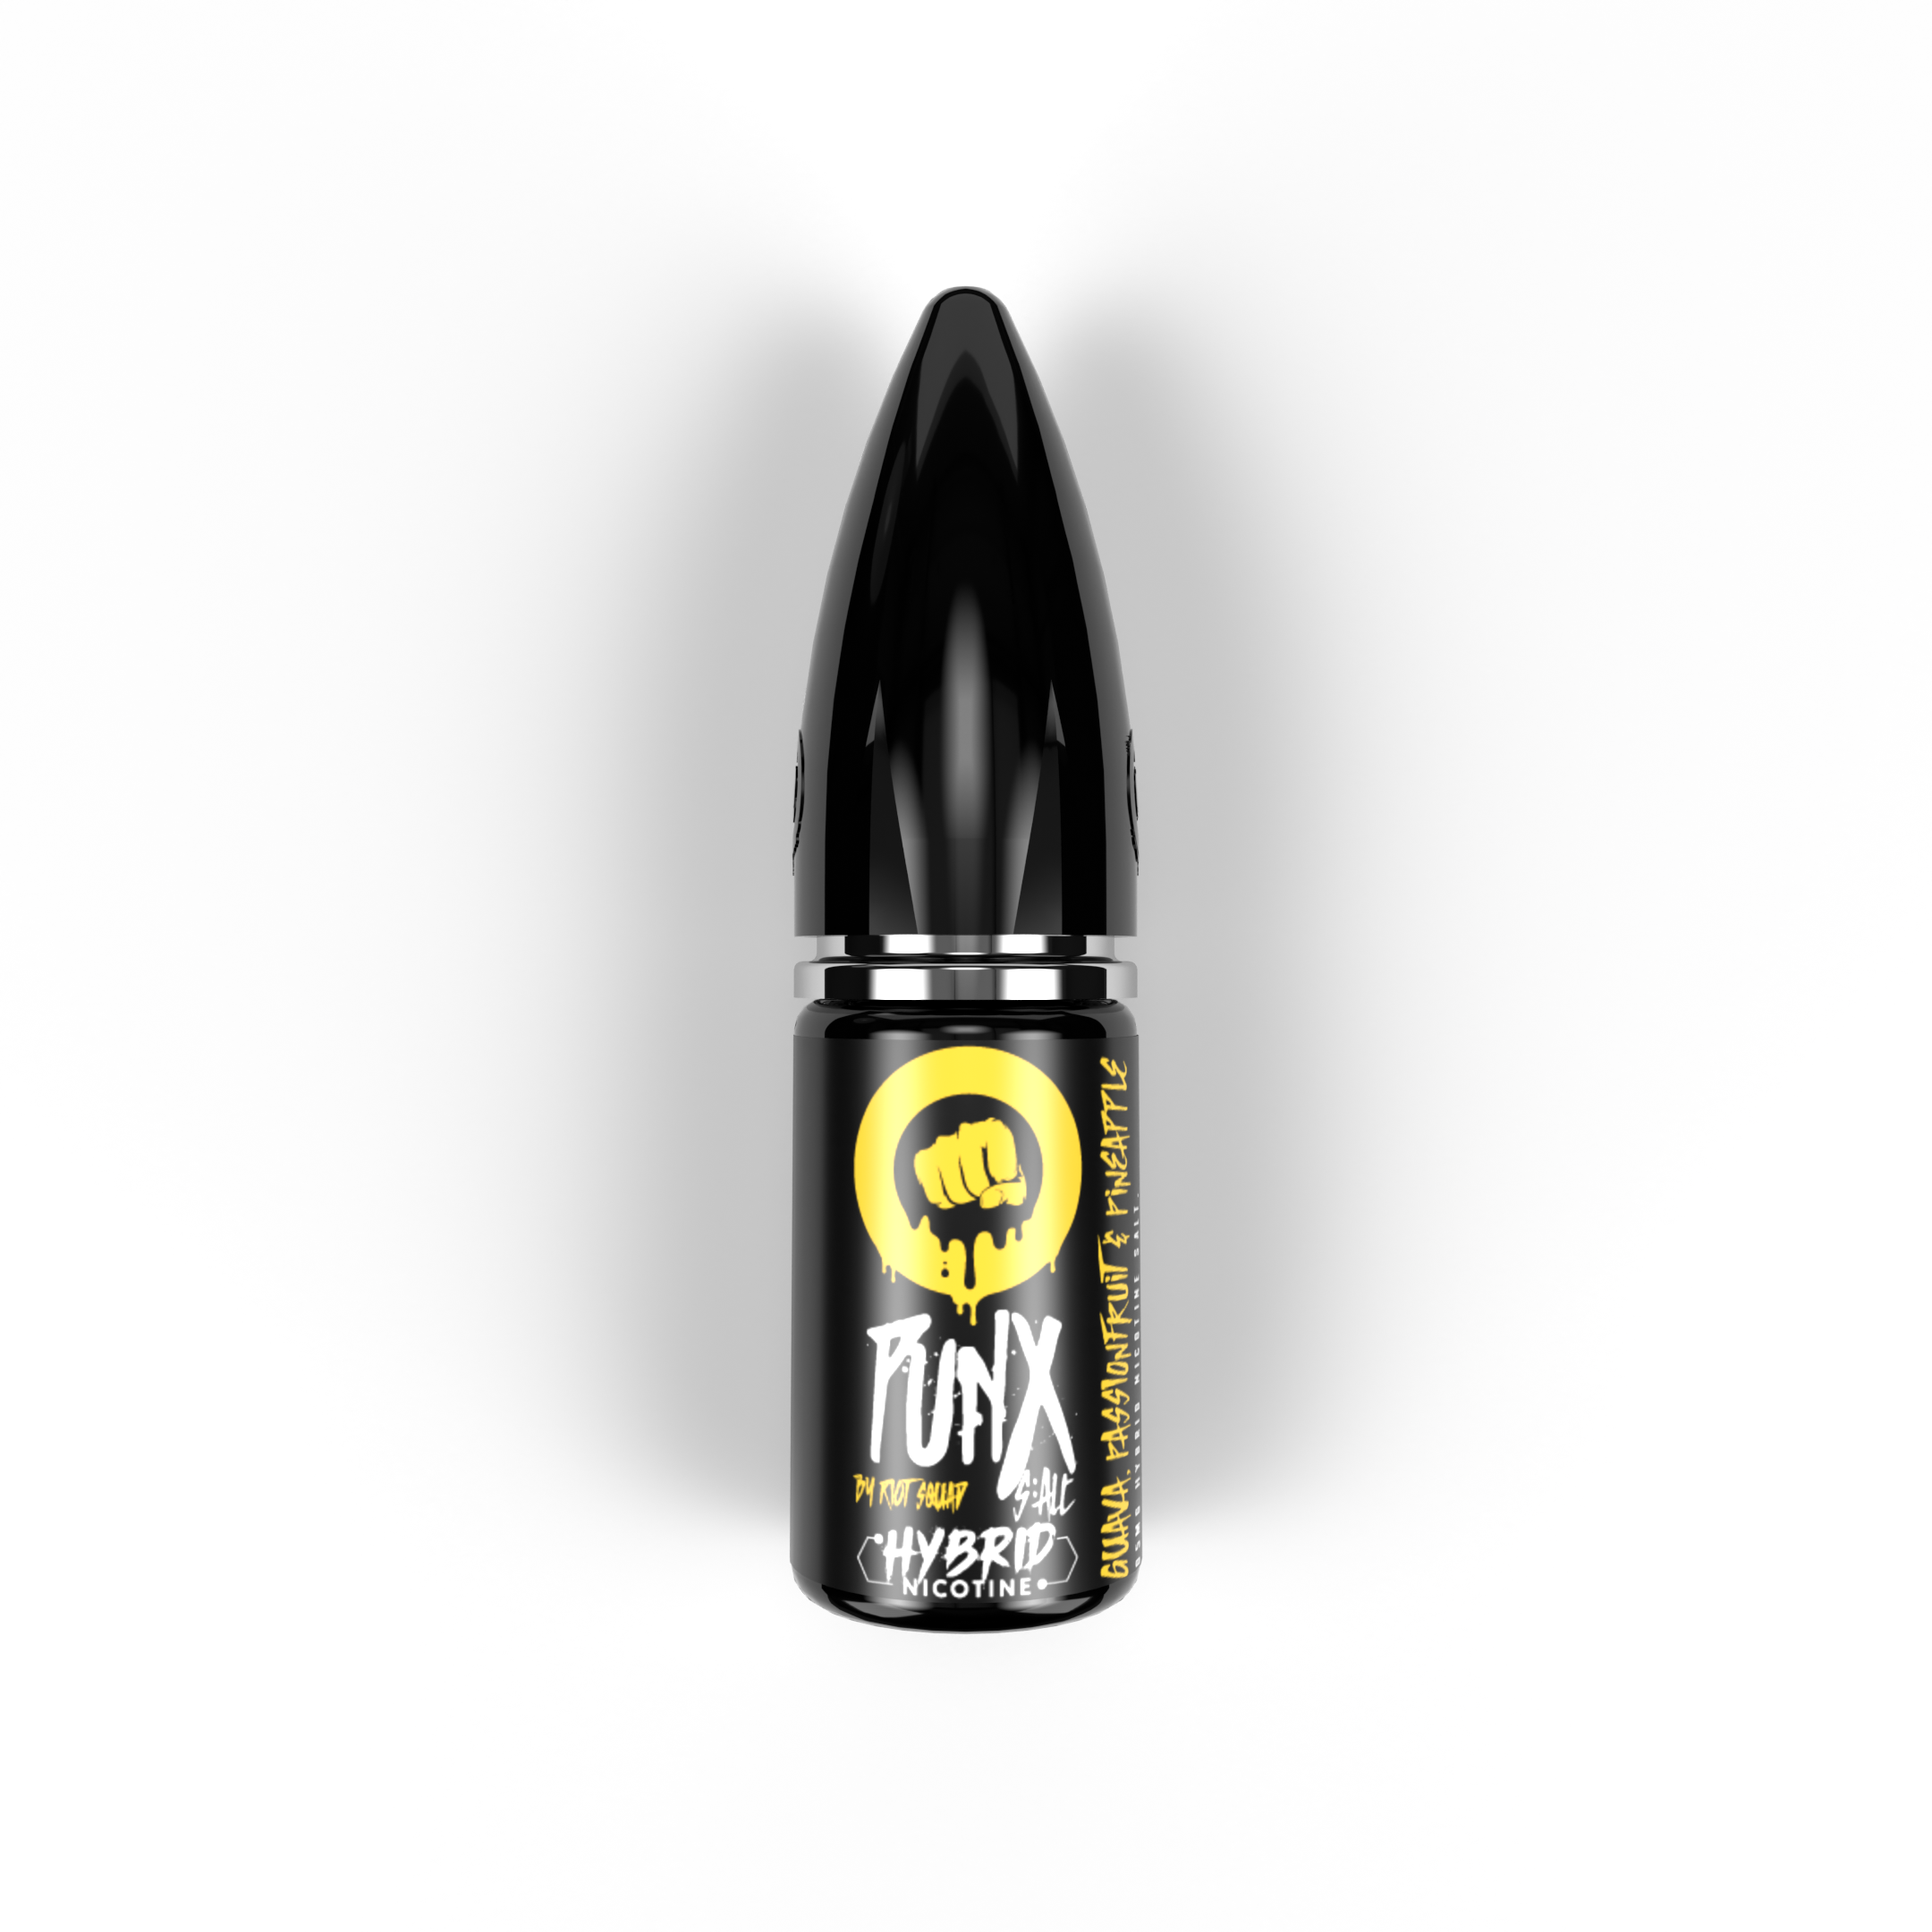 Riot Squad PUNX Hybrid Nic Salts - Explore a wide range of e-liquids, vape kits, accessories, and coils for vapers of all levels - Vape Saloon